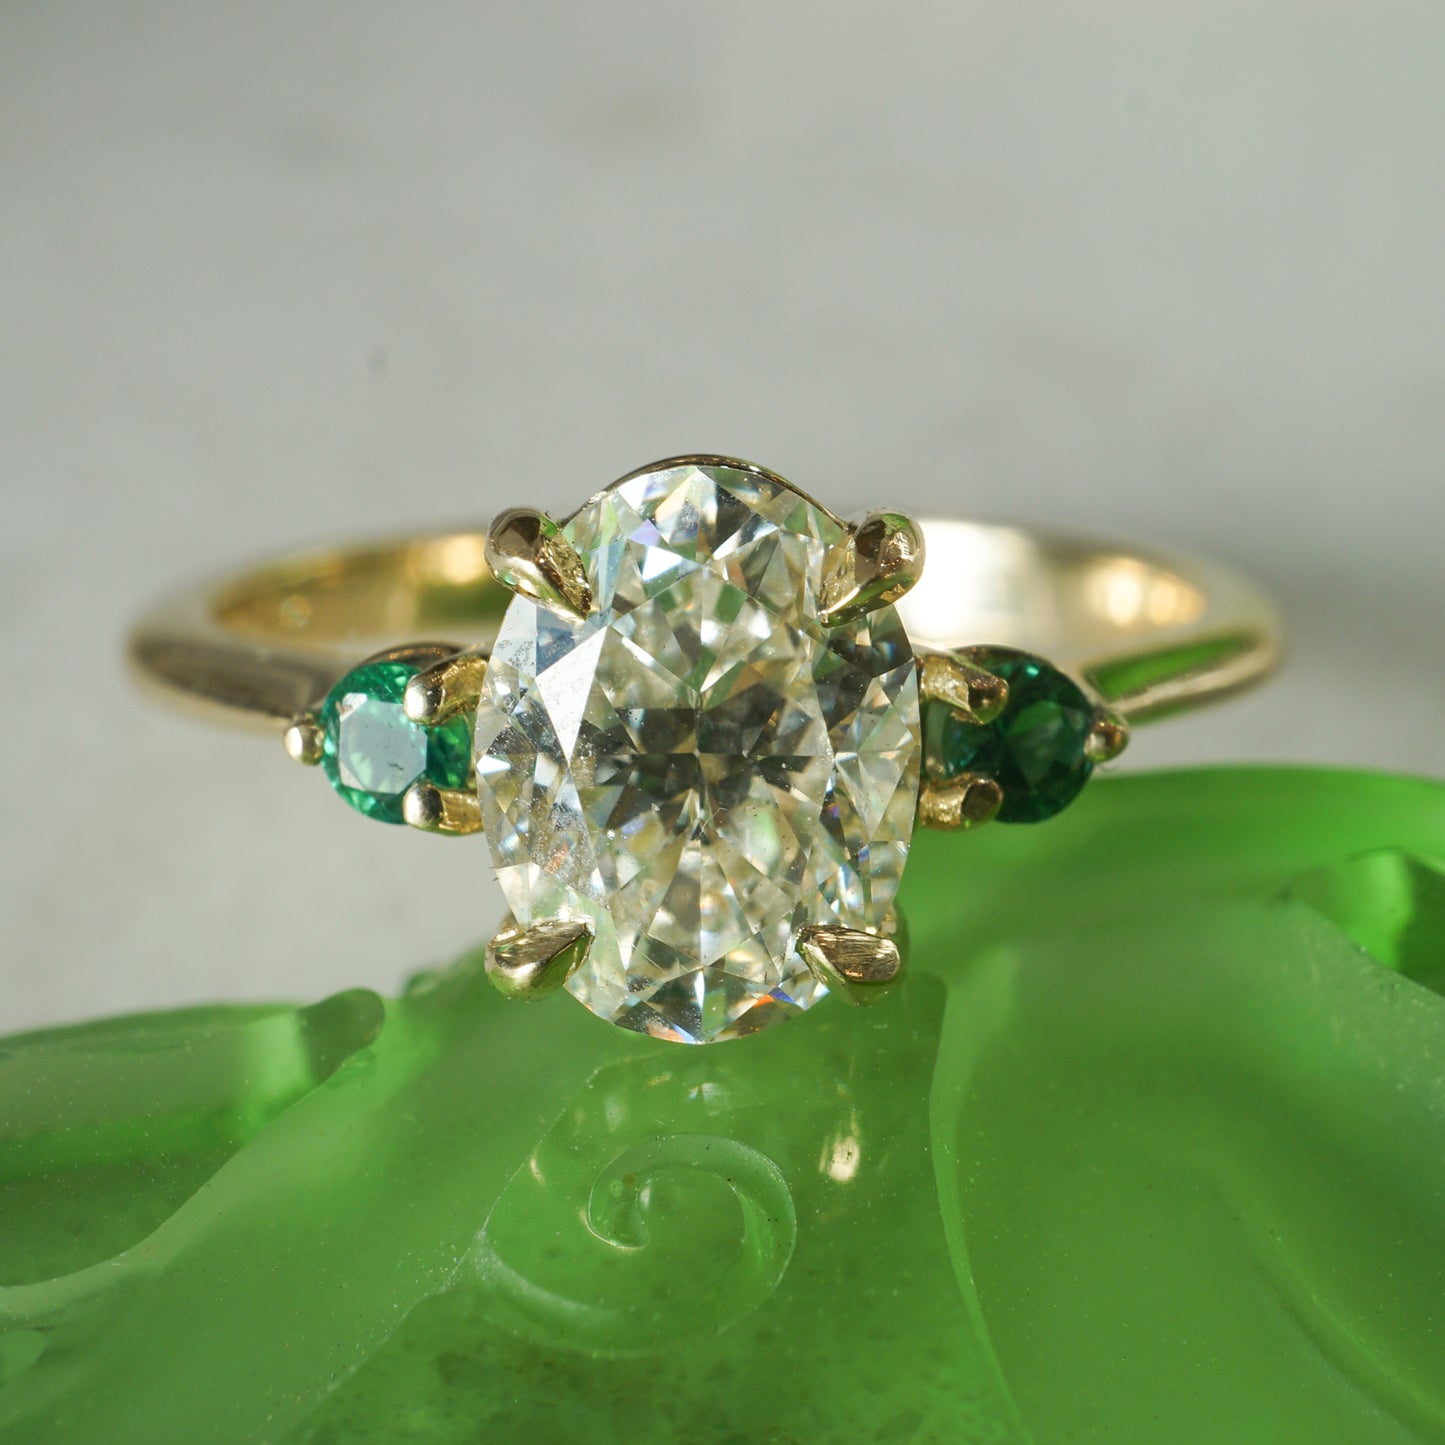 1.51 Oval Cut Diamond Engagement Ring w/ Emerald Accents